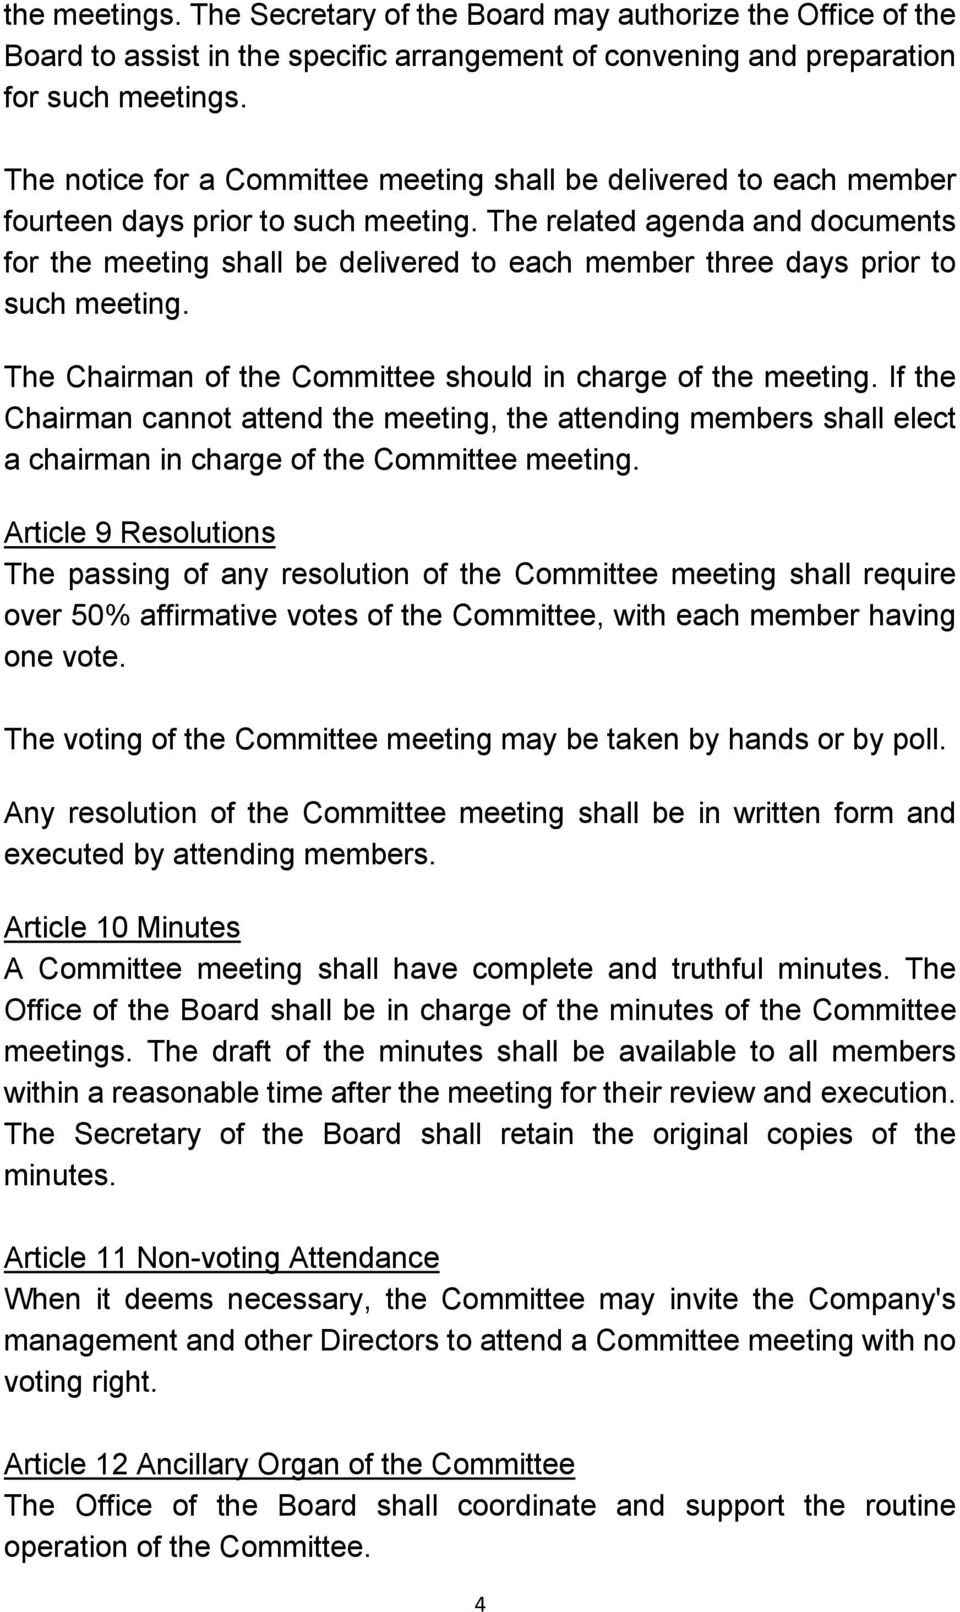 The related agenda and documents for the meeting shall be delivered to each member three days prior to such meeting. The Chairman of the Committee should in charge of the meeting.